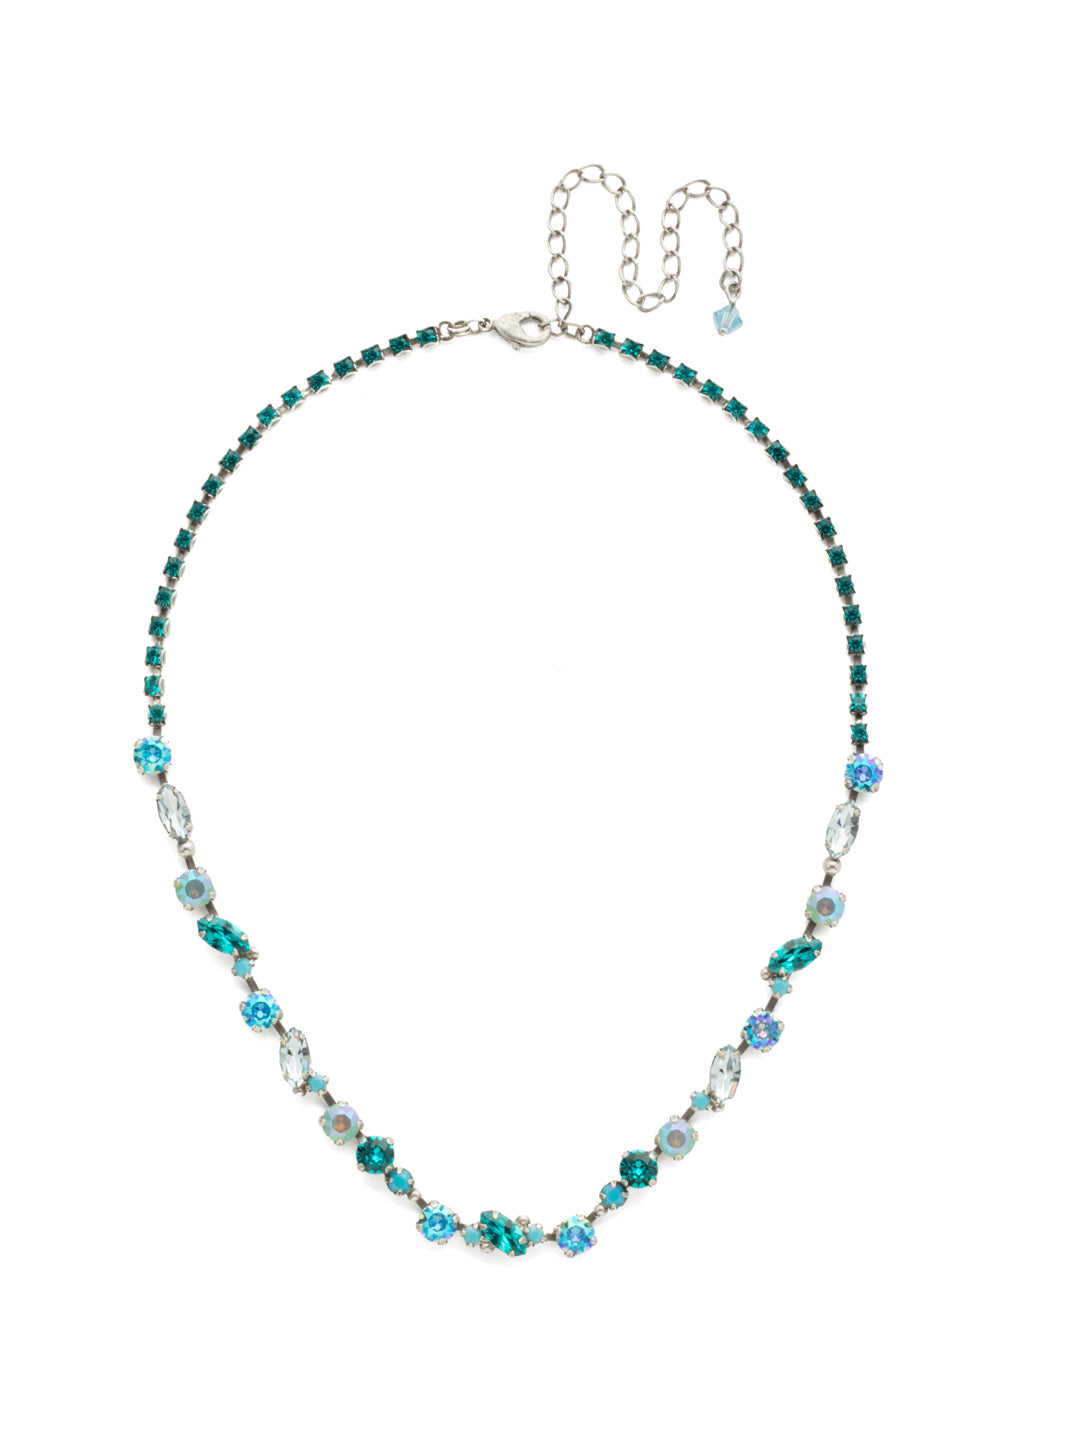 Simply Stated Tennis Necklace - NDN1ASSMN